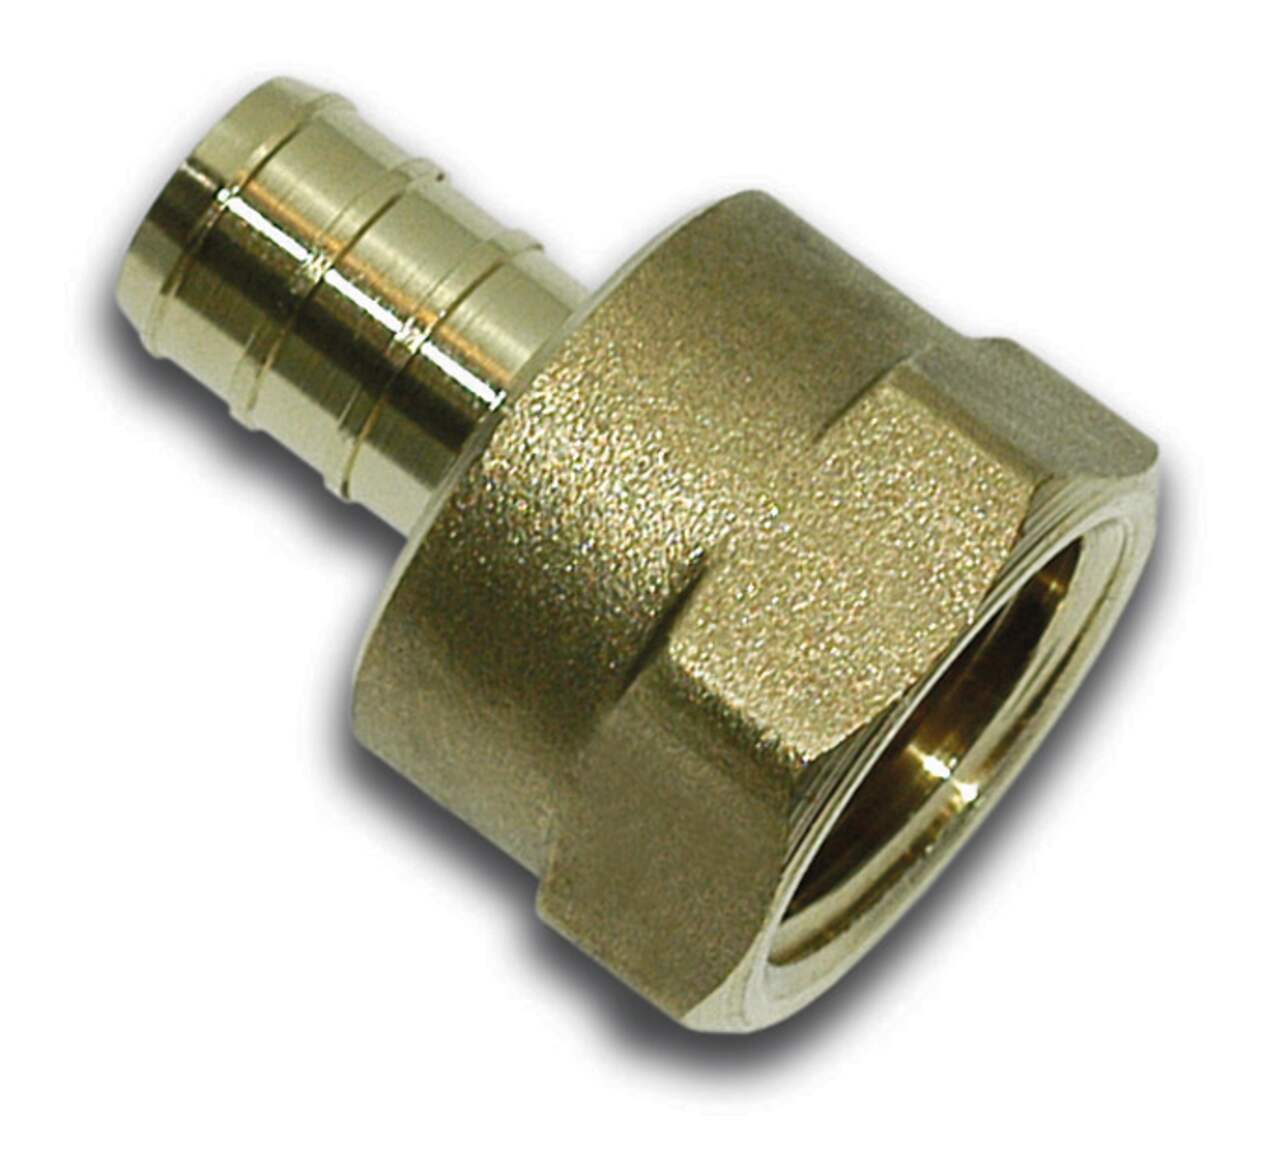 BRASS,Special Adapter Fittings